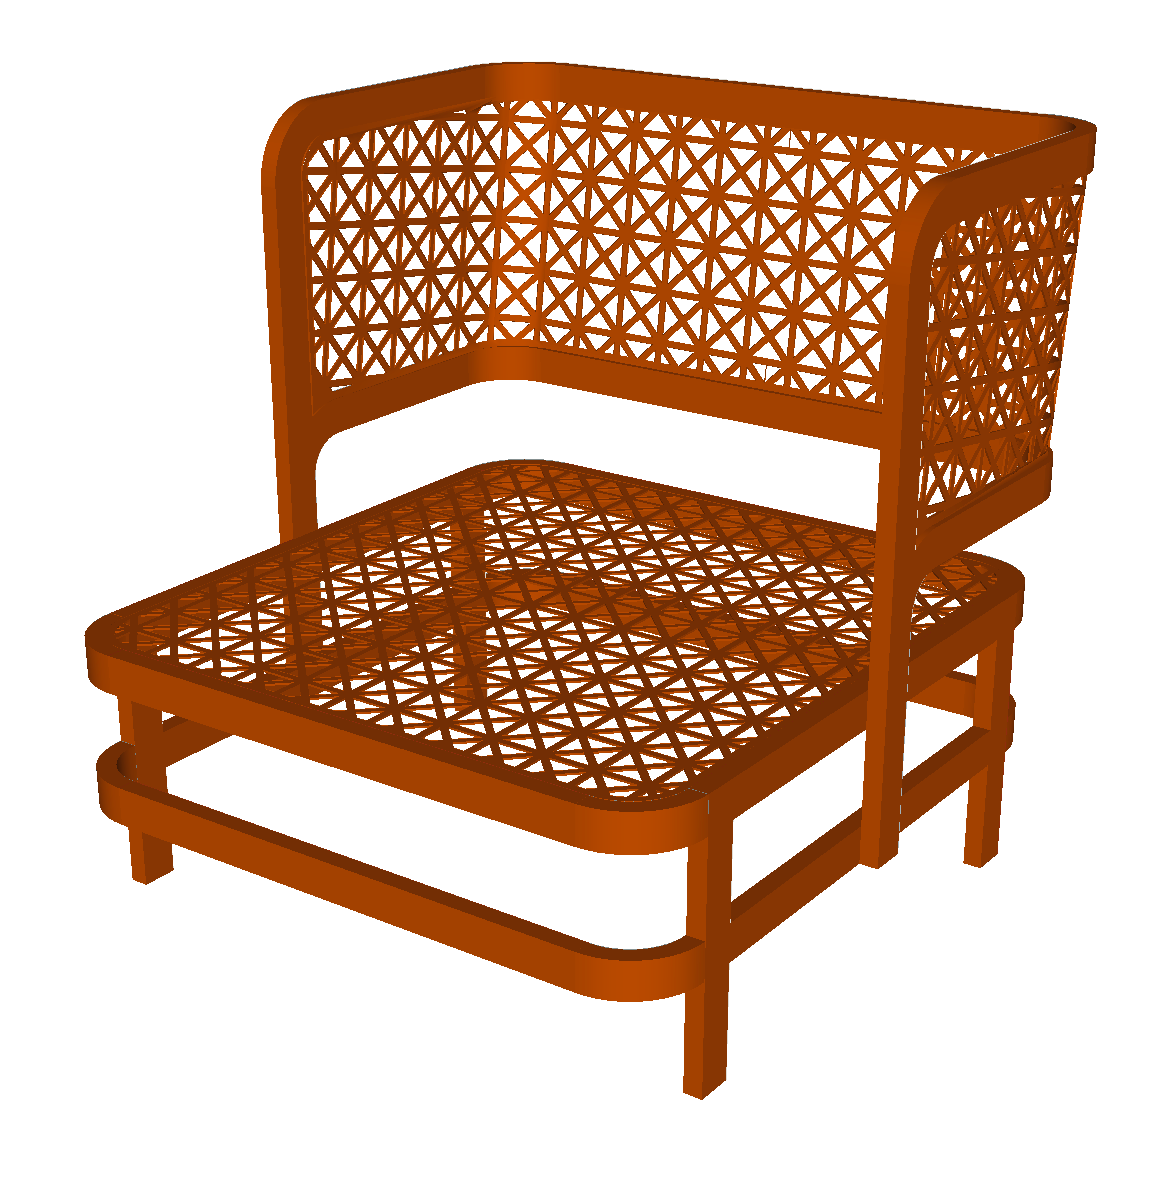 Ananas Chair - Spice